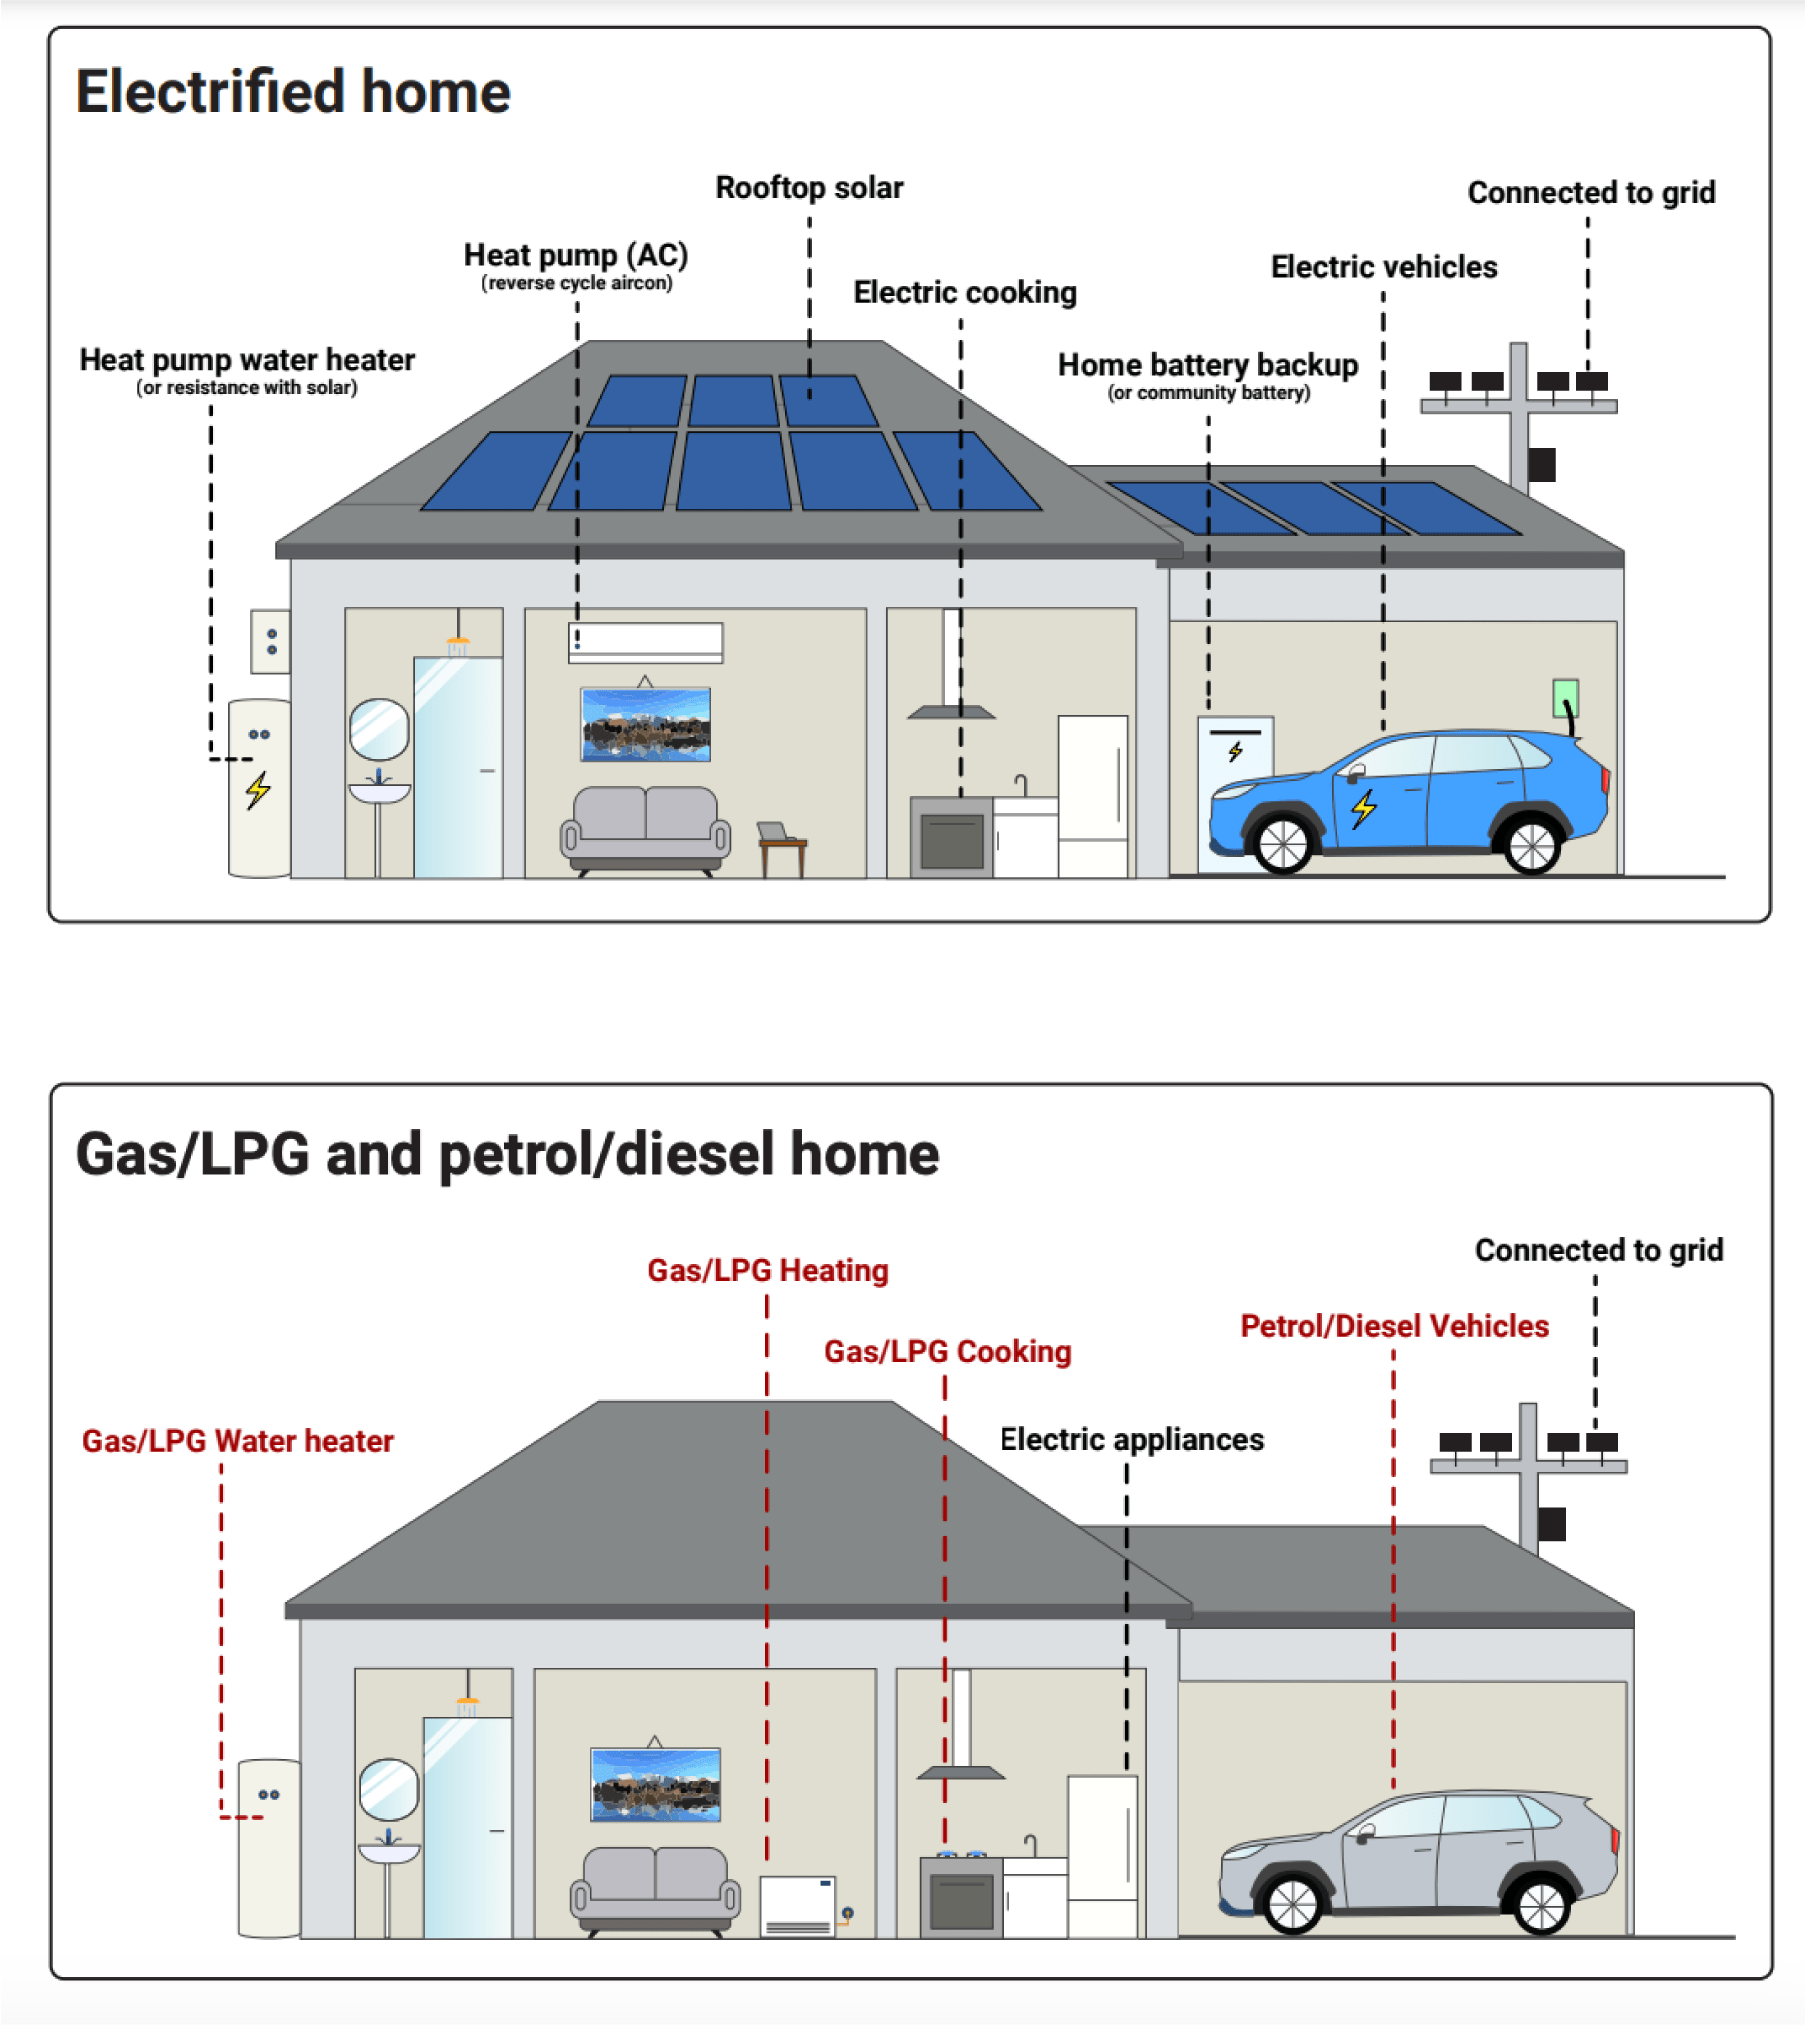 Electrified home vs other